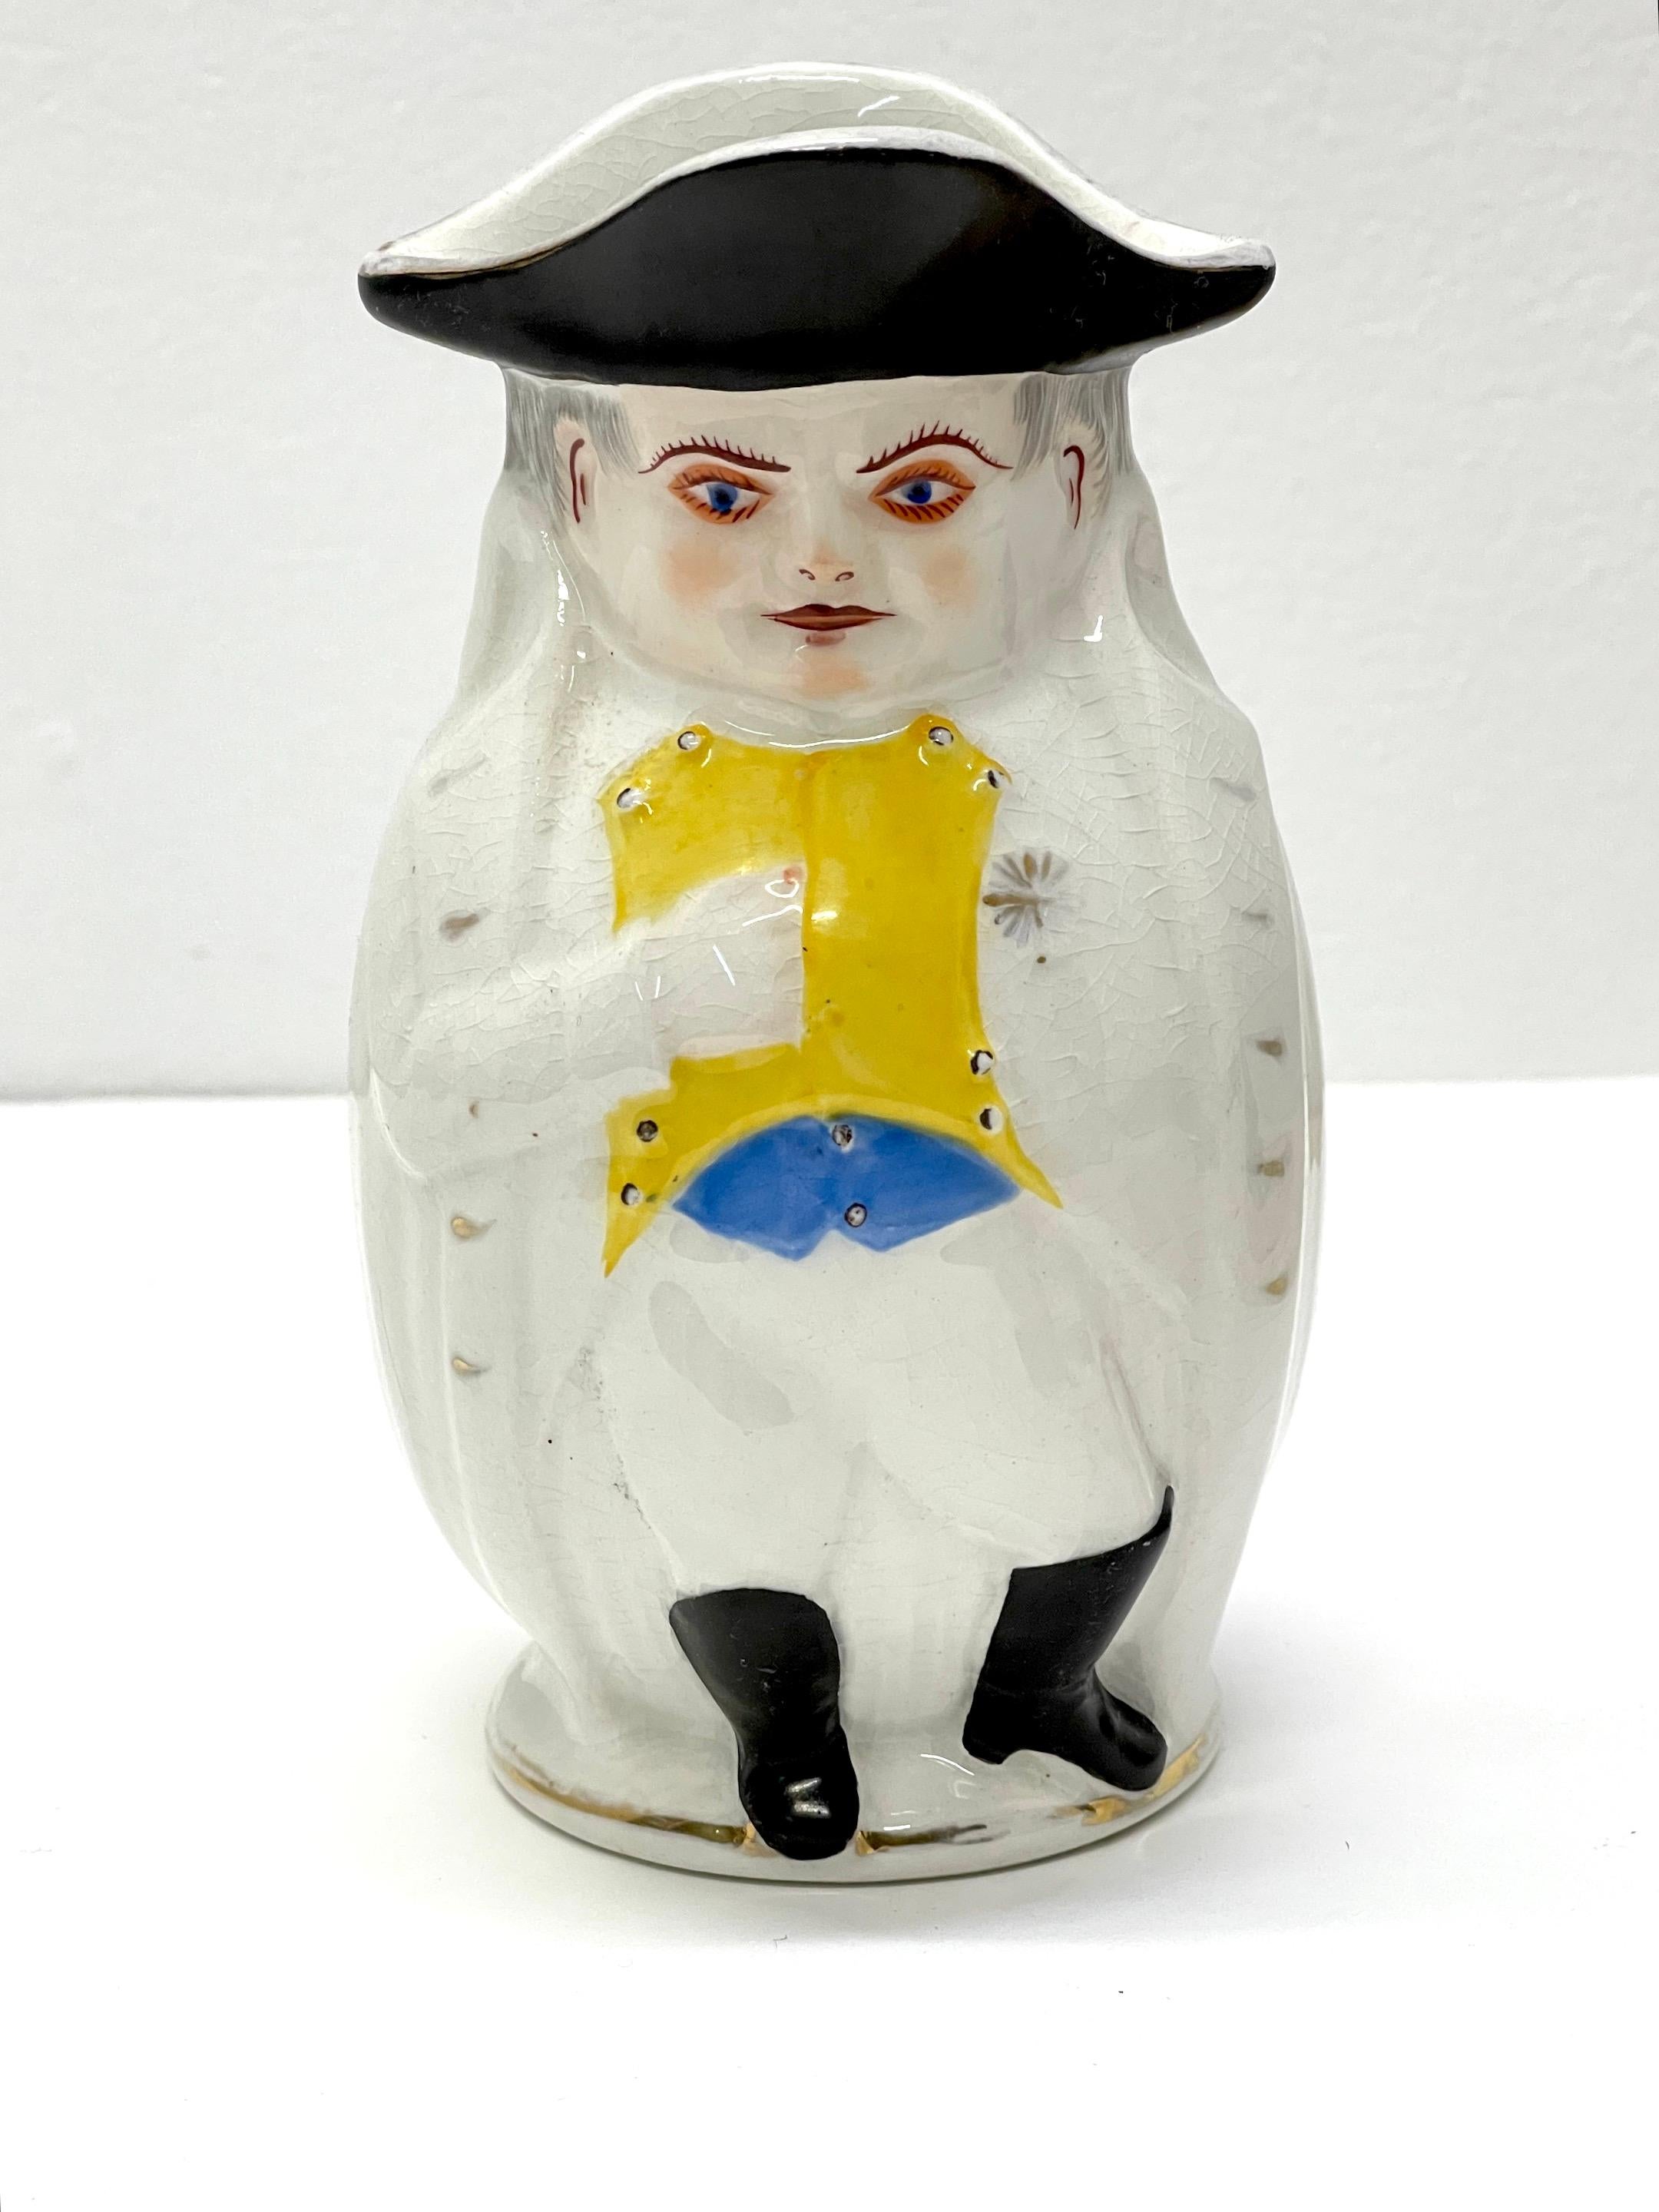 President William McKinley as Napoleon ' Small' Toby Mug, by Morris & Willmore
Made by  Columbian Art Pottery / Morris and Willmore of Trenton, New Jersey
This model was made in sizes from 4.5-inches high to 11-inches high.
Retailed and/or decorated